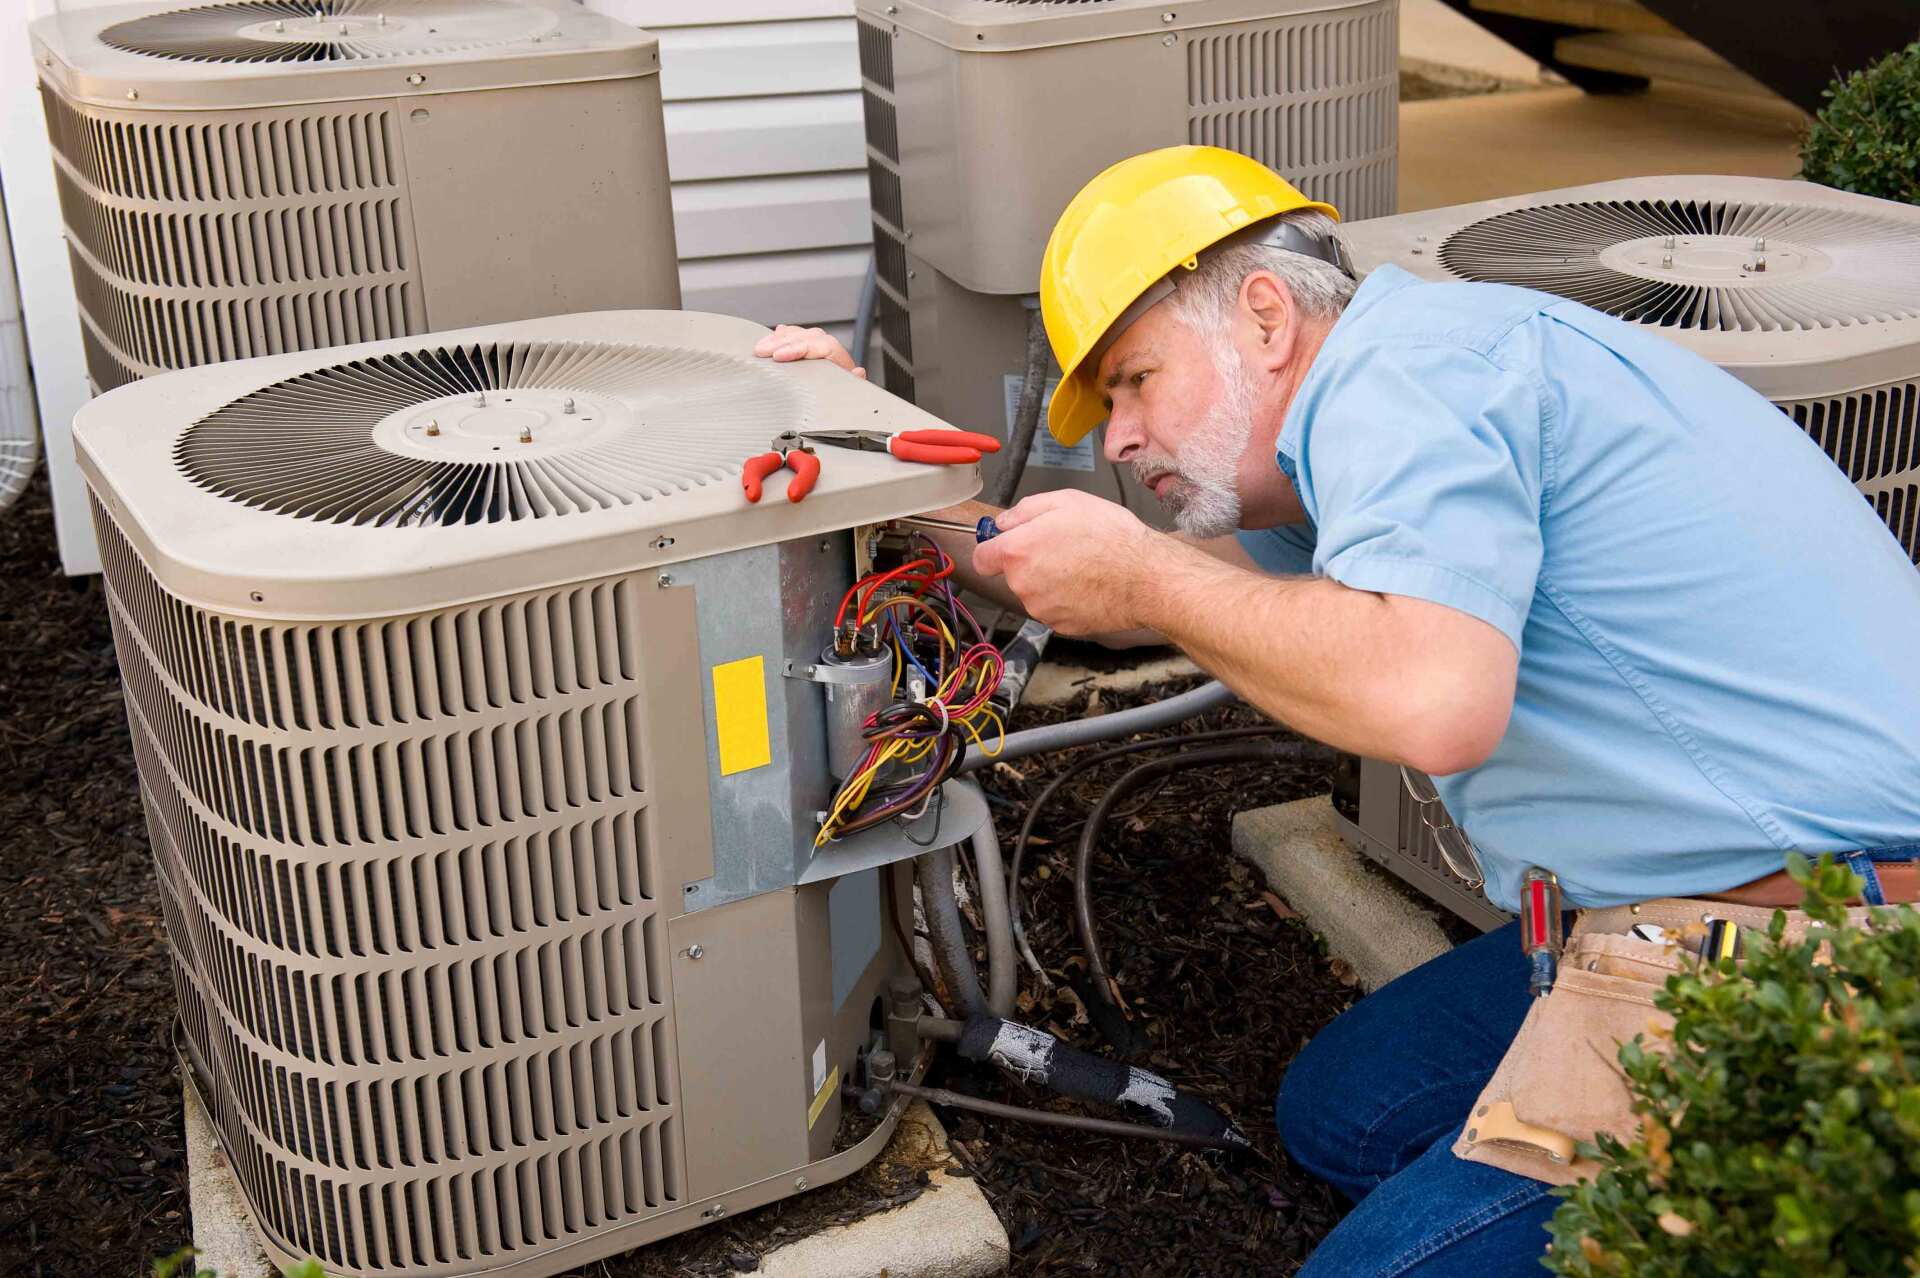 Repairing hvac — Champaign, IL — Fred's Plumbing, Heating, Air Conditioning & Electric